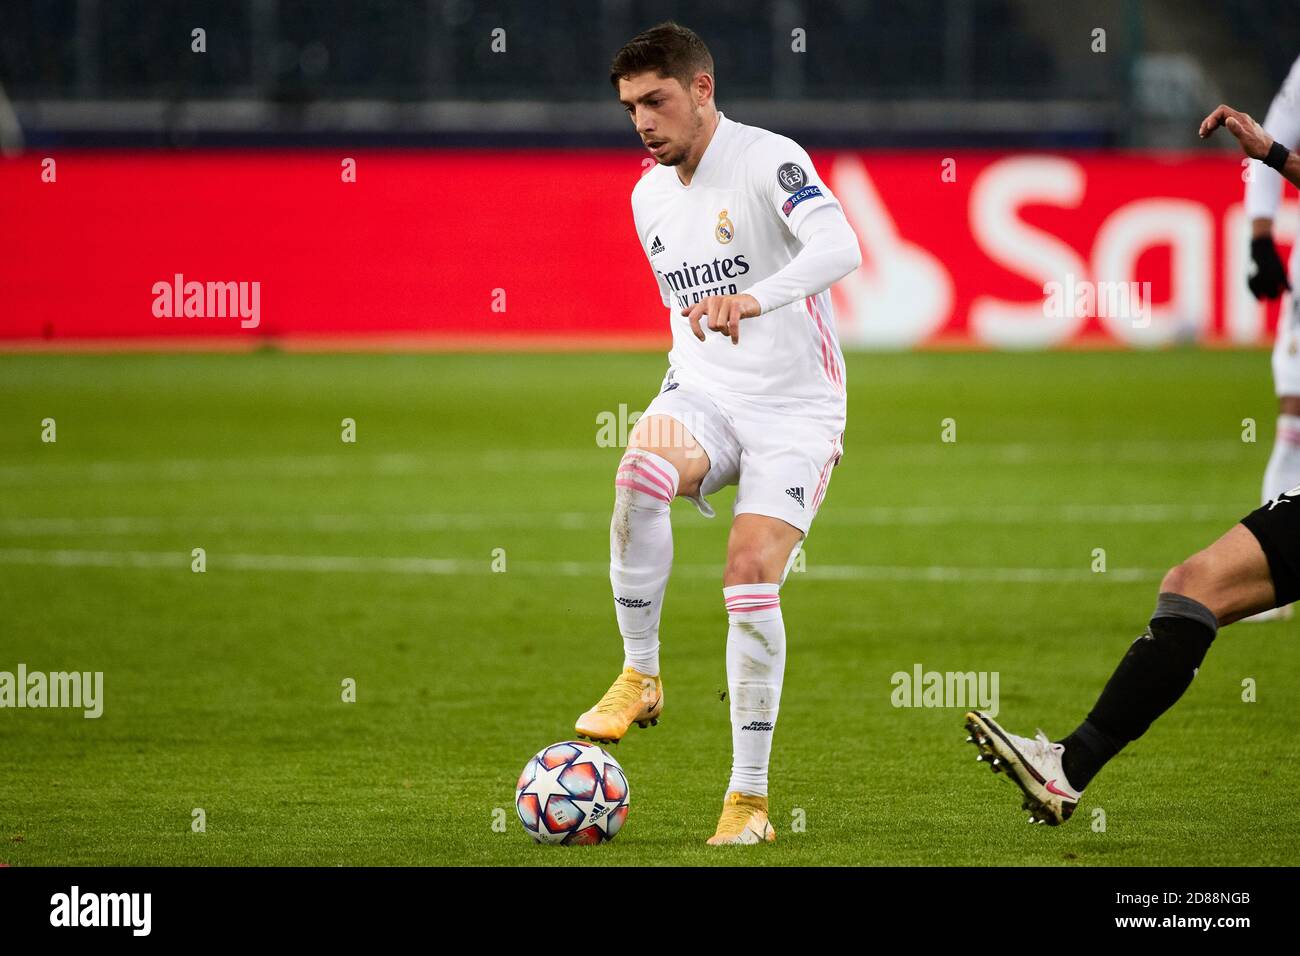 Monchengladbach, Germany. 27th Oct, 2020. Federico Valverde of Real Madrid during the UEFA Champions League match between Borussia Monchengladbach and Real Madrid at Borussia-Park on October 27, 2020 in Monchengladbach, Spain. Credit: Dax Images/Alamy Live News Stock Photo